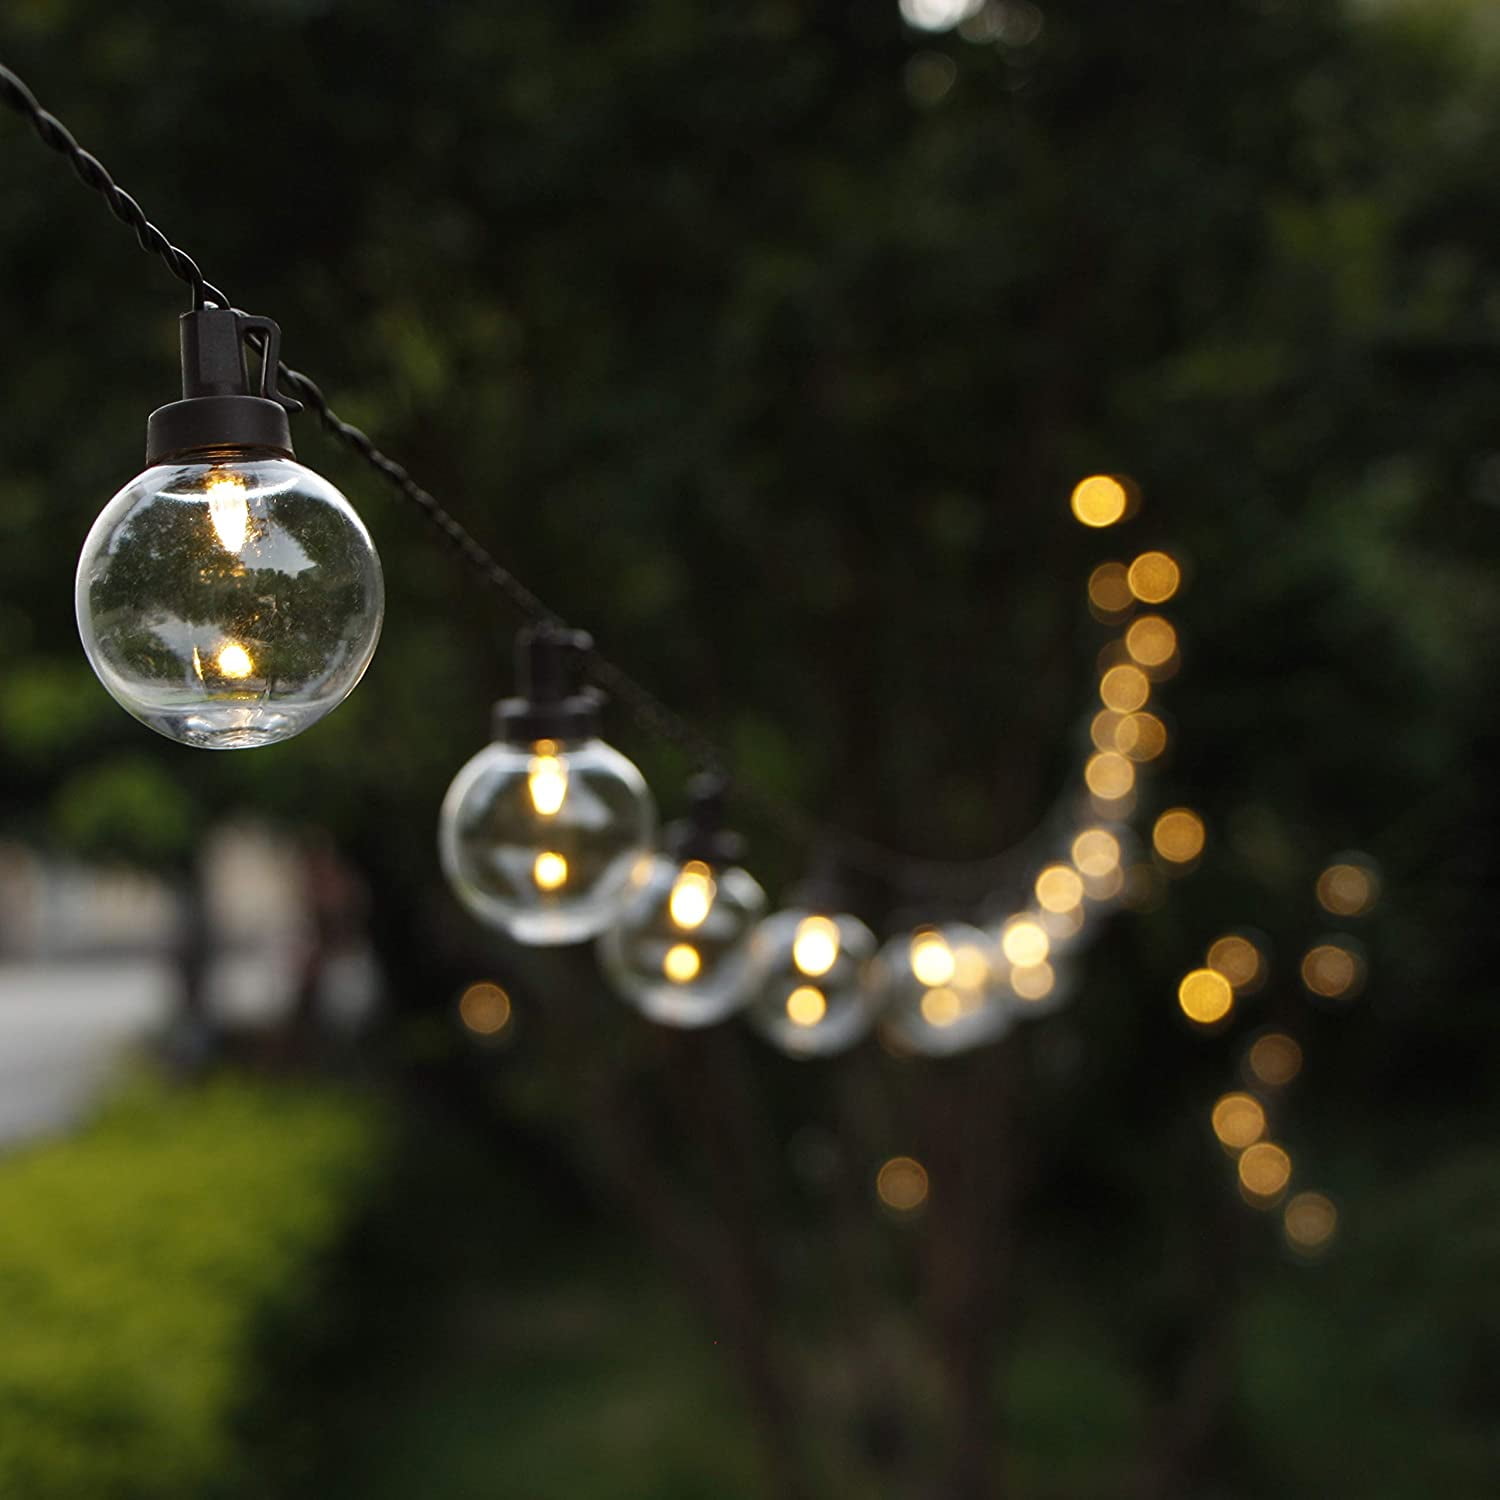 Details about   Outdoor String Light Vintage Retro Style Water Oil Lamp LED Garden Party Decor 